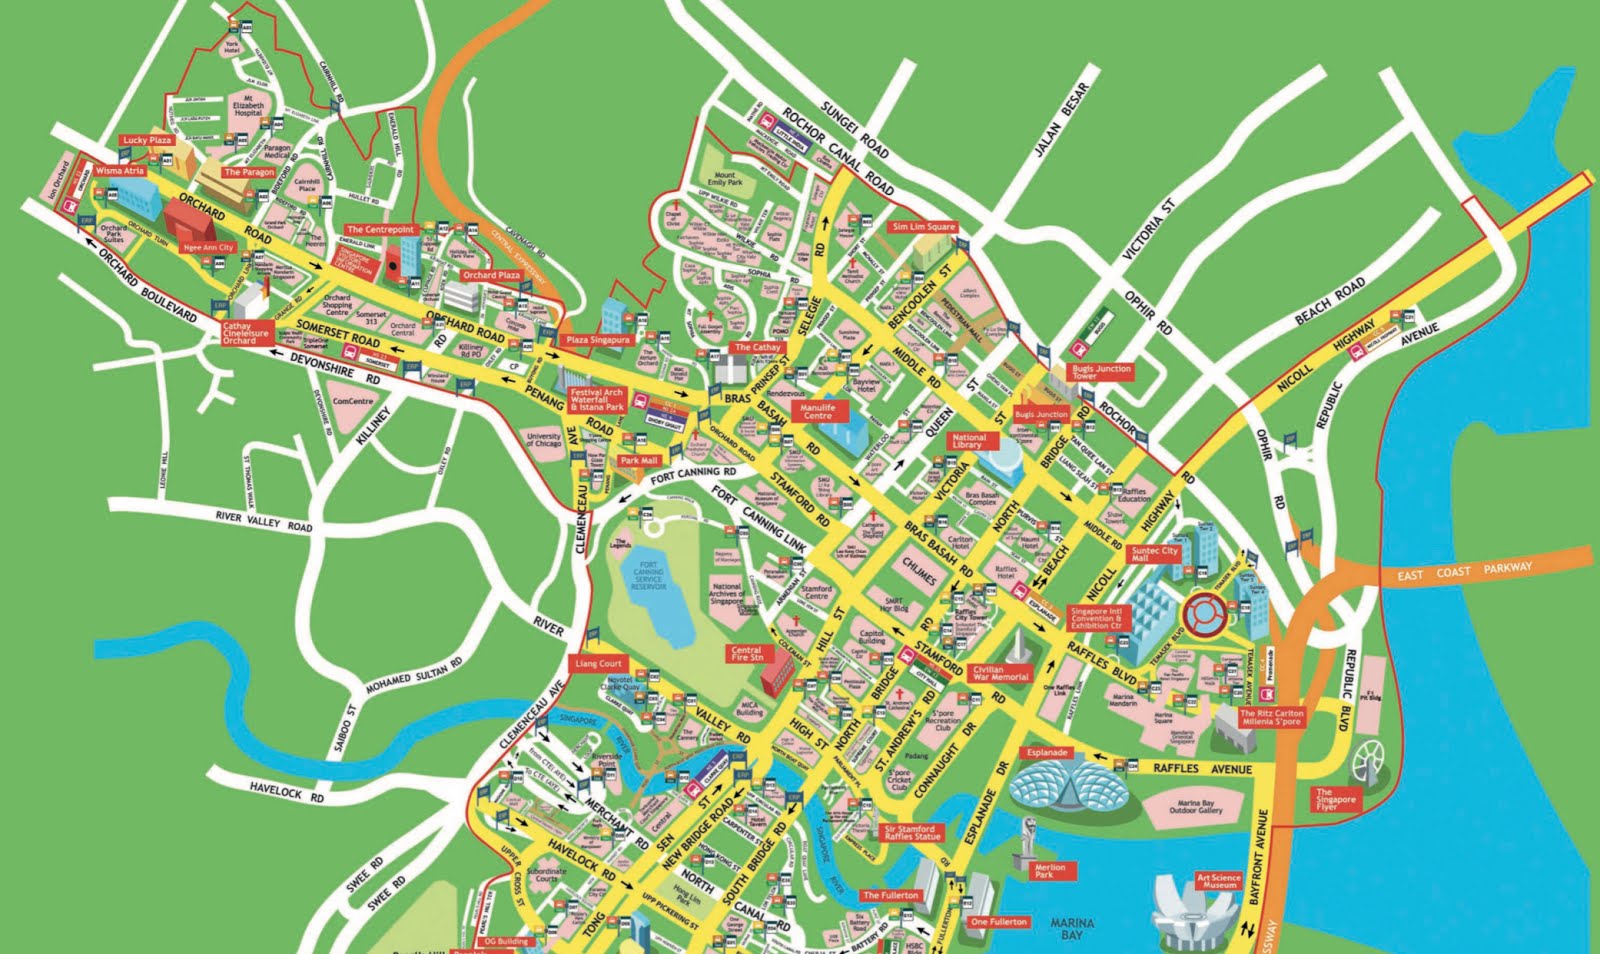 Singapore Central Area Map Daniel Choy: Singapore Central Business District Map, CBD Map and 